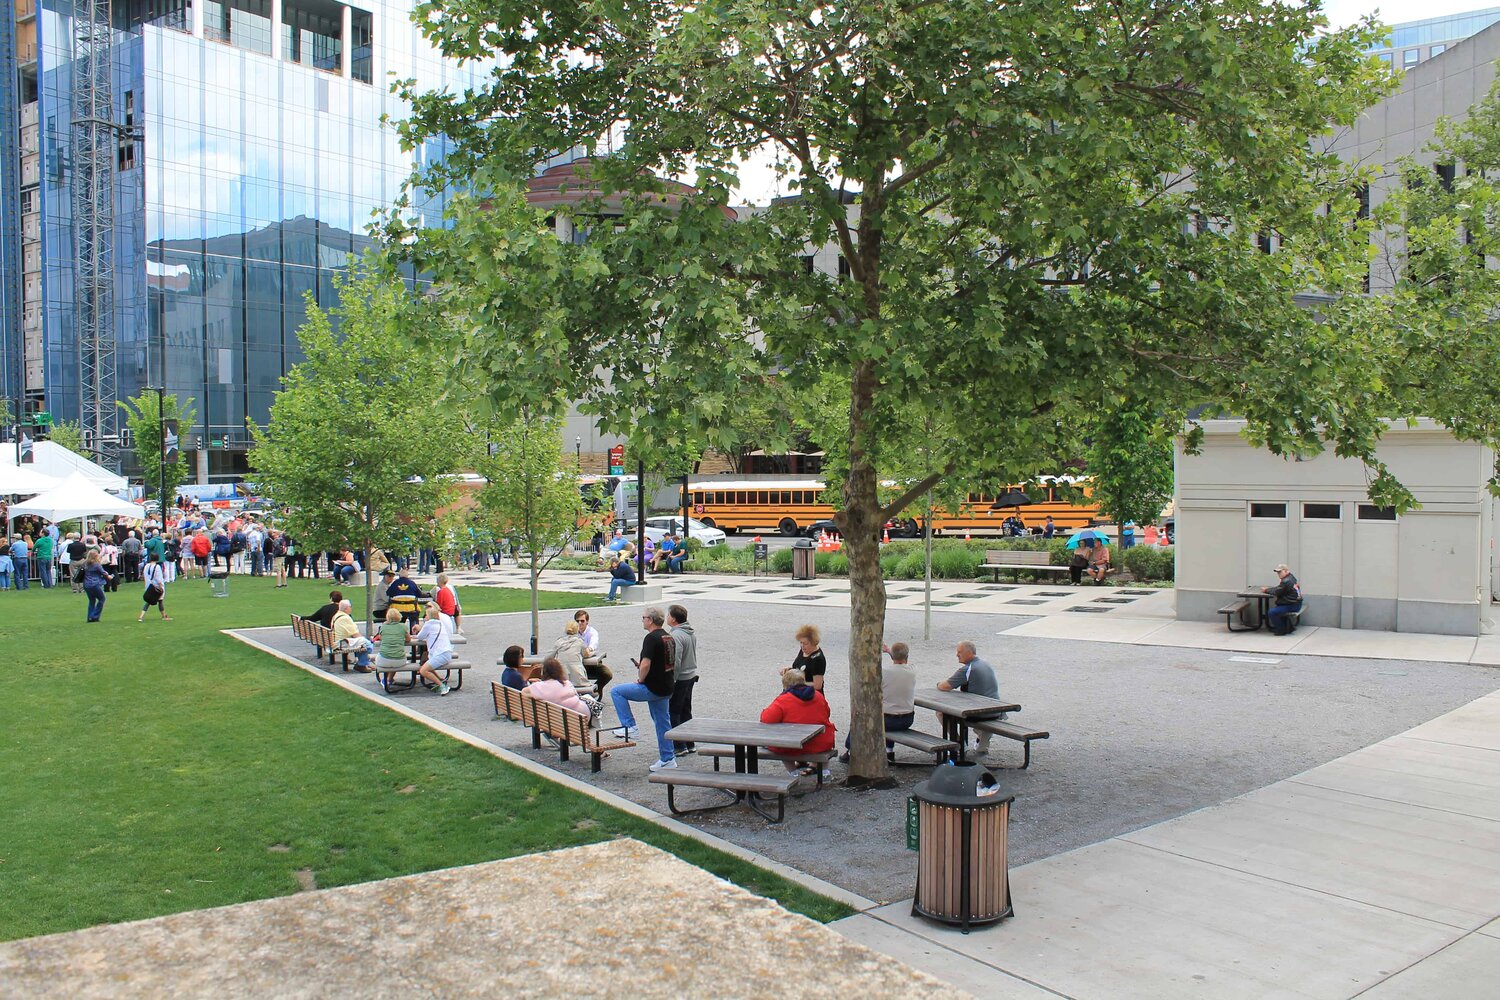 City dwellers enjoy a tranquil moment in the Walk of Fame park, surrounded by lush greenery and the bustling backdrop of high-rise buildings.